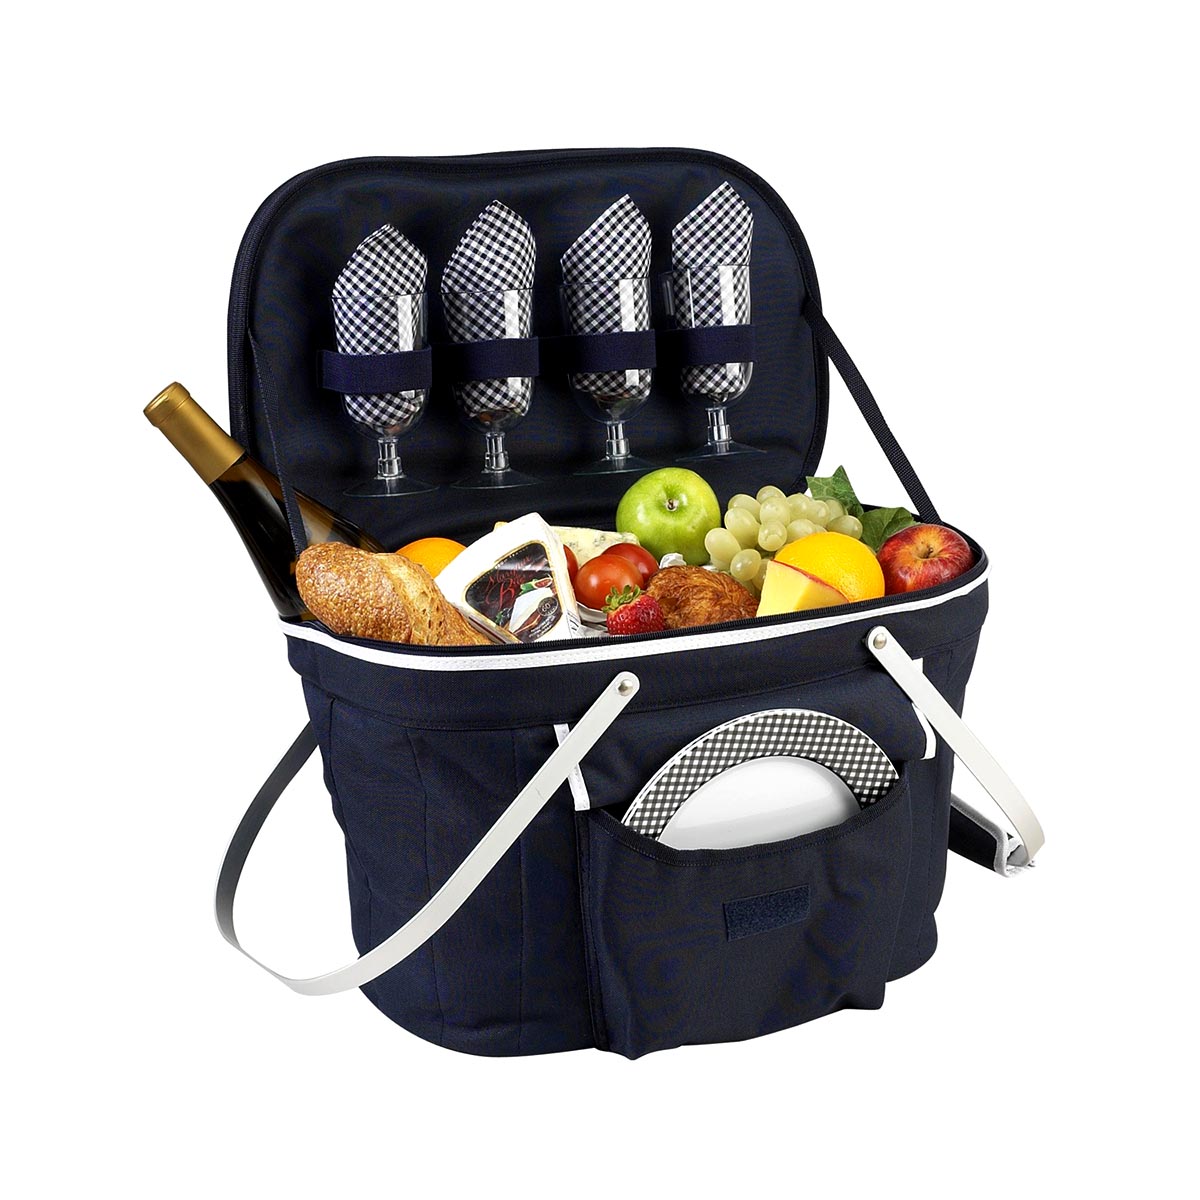 14 Amazing Insulated Picnic Basket For 2023 1703754253 